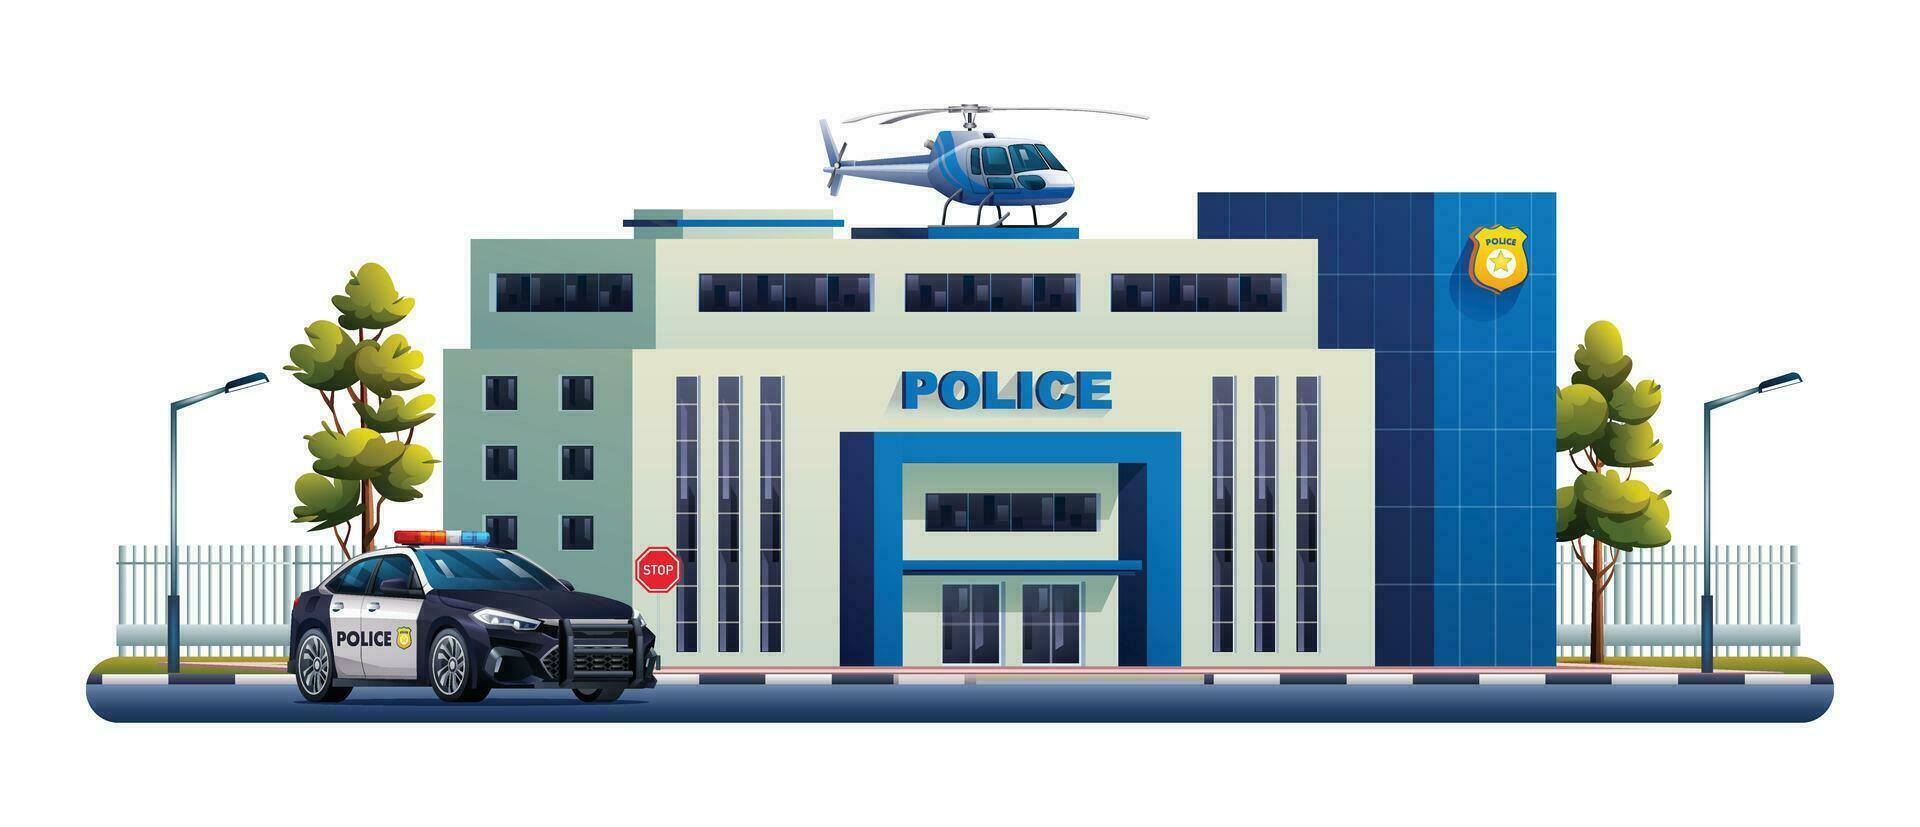 Police station building with patrol car and helicopter. Police department office. Vector illustration